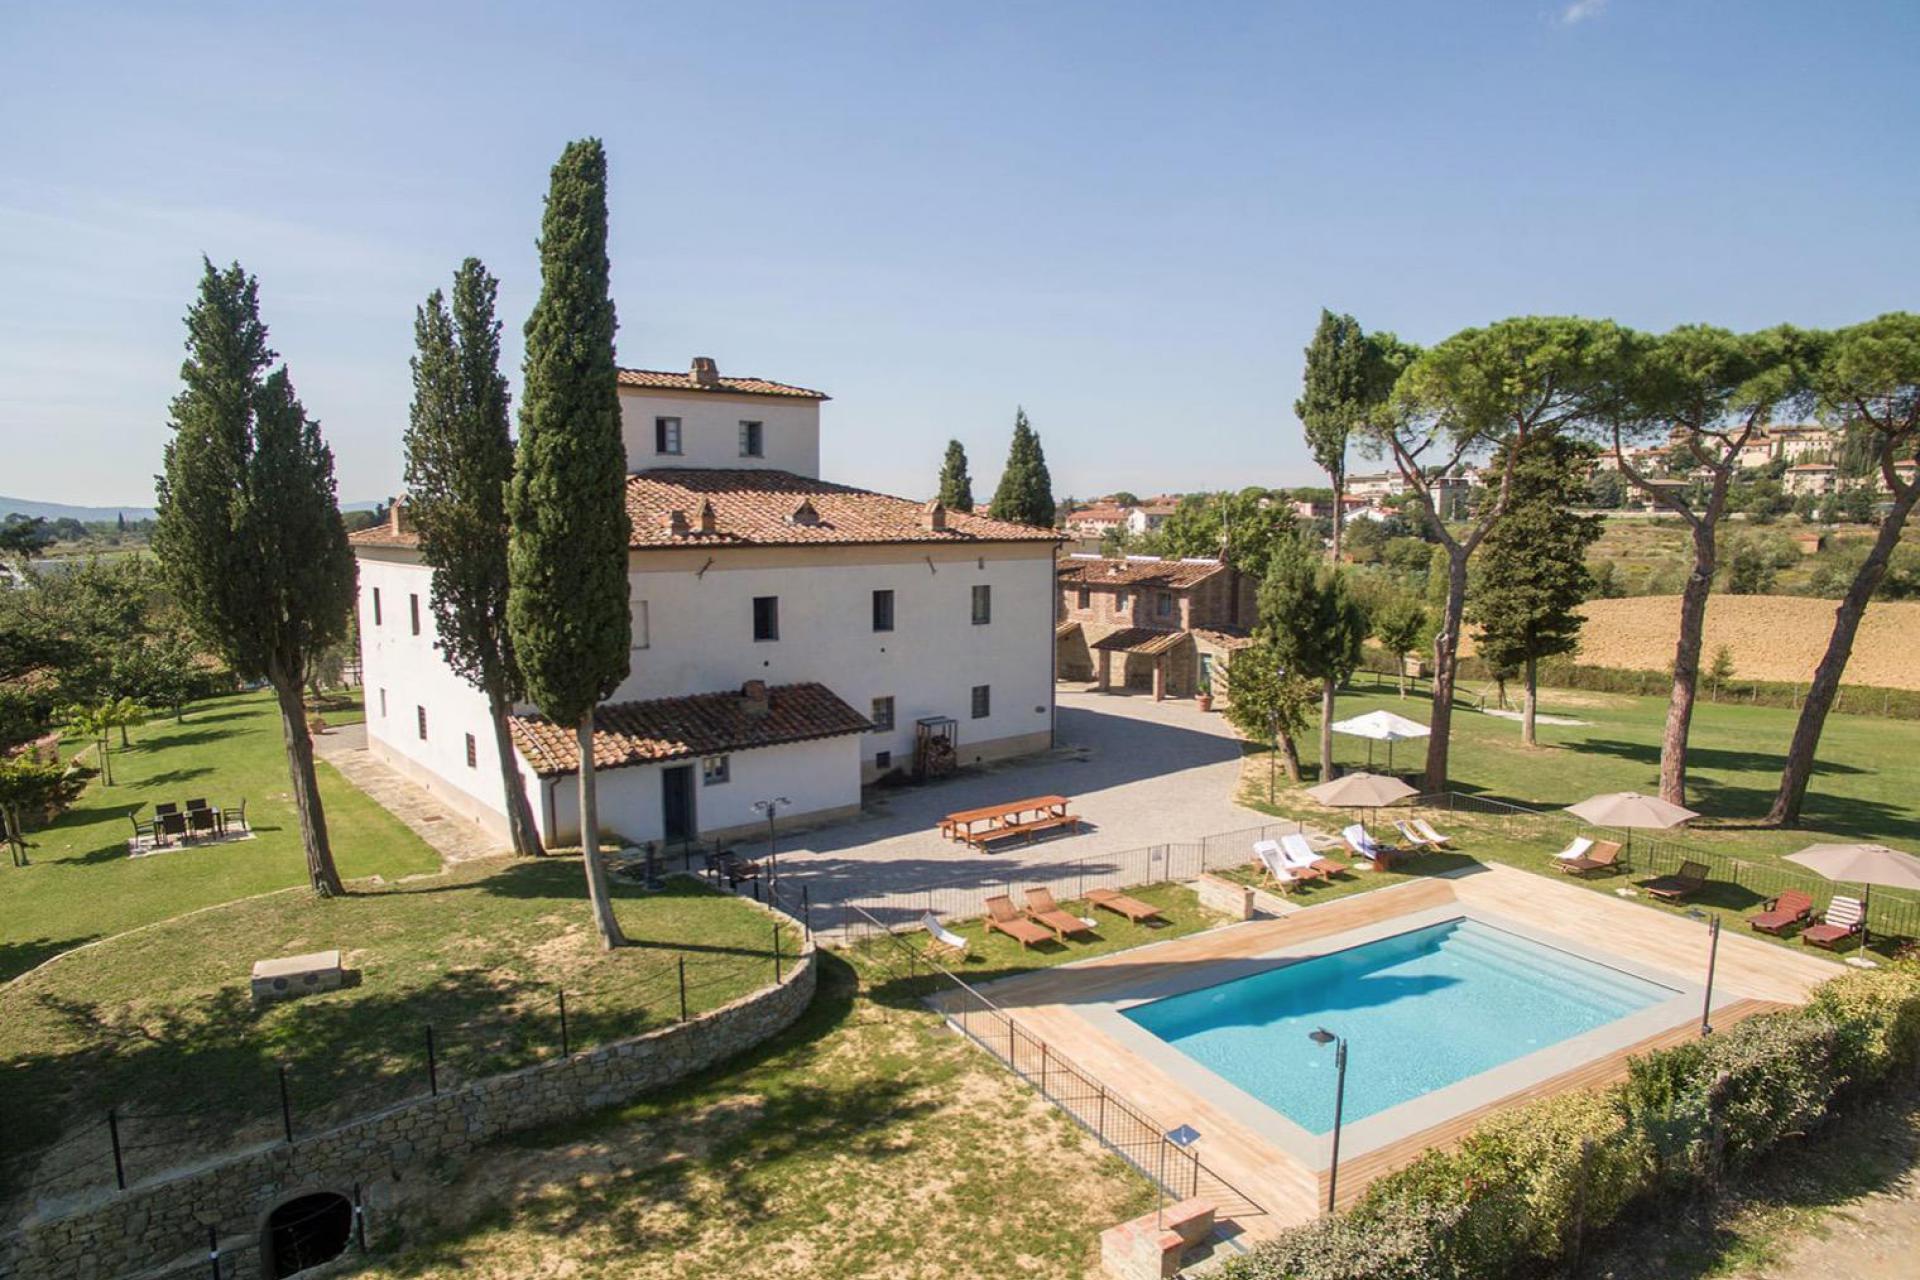 Agriturismo in Tuscany with its own restaurant